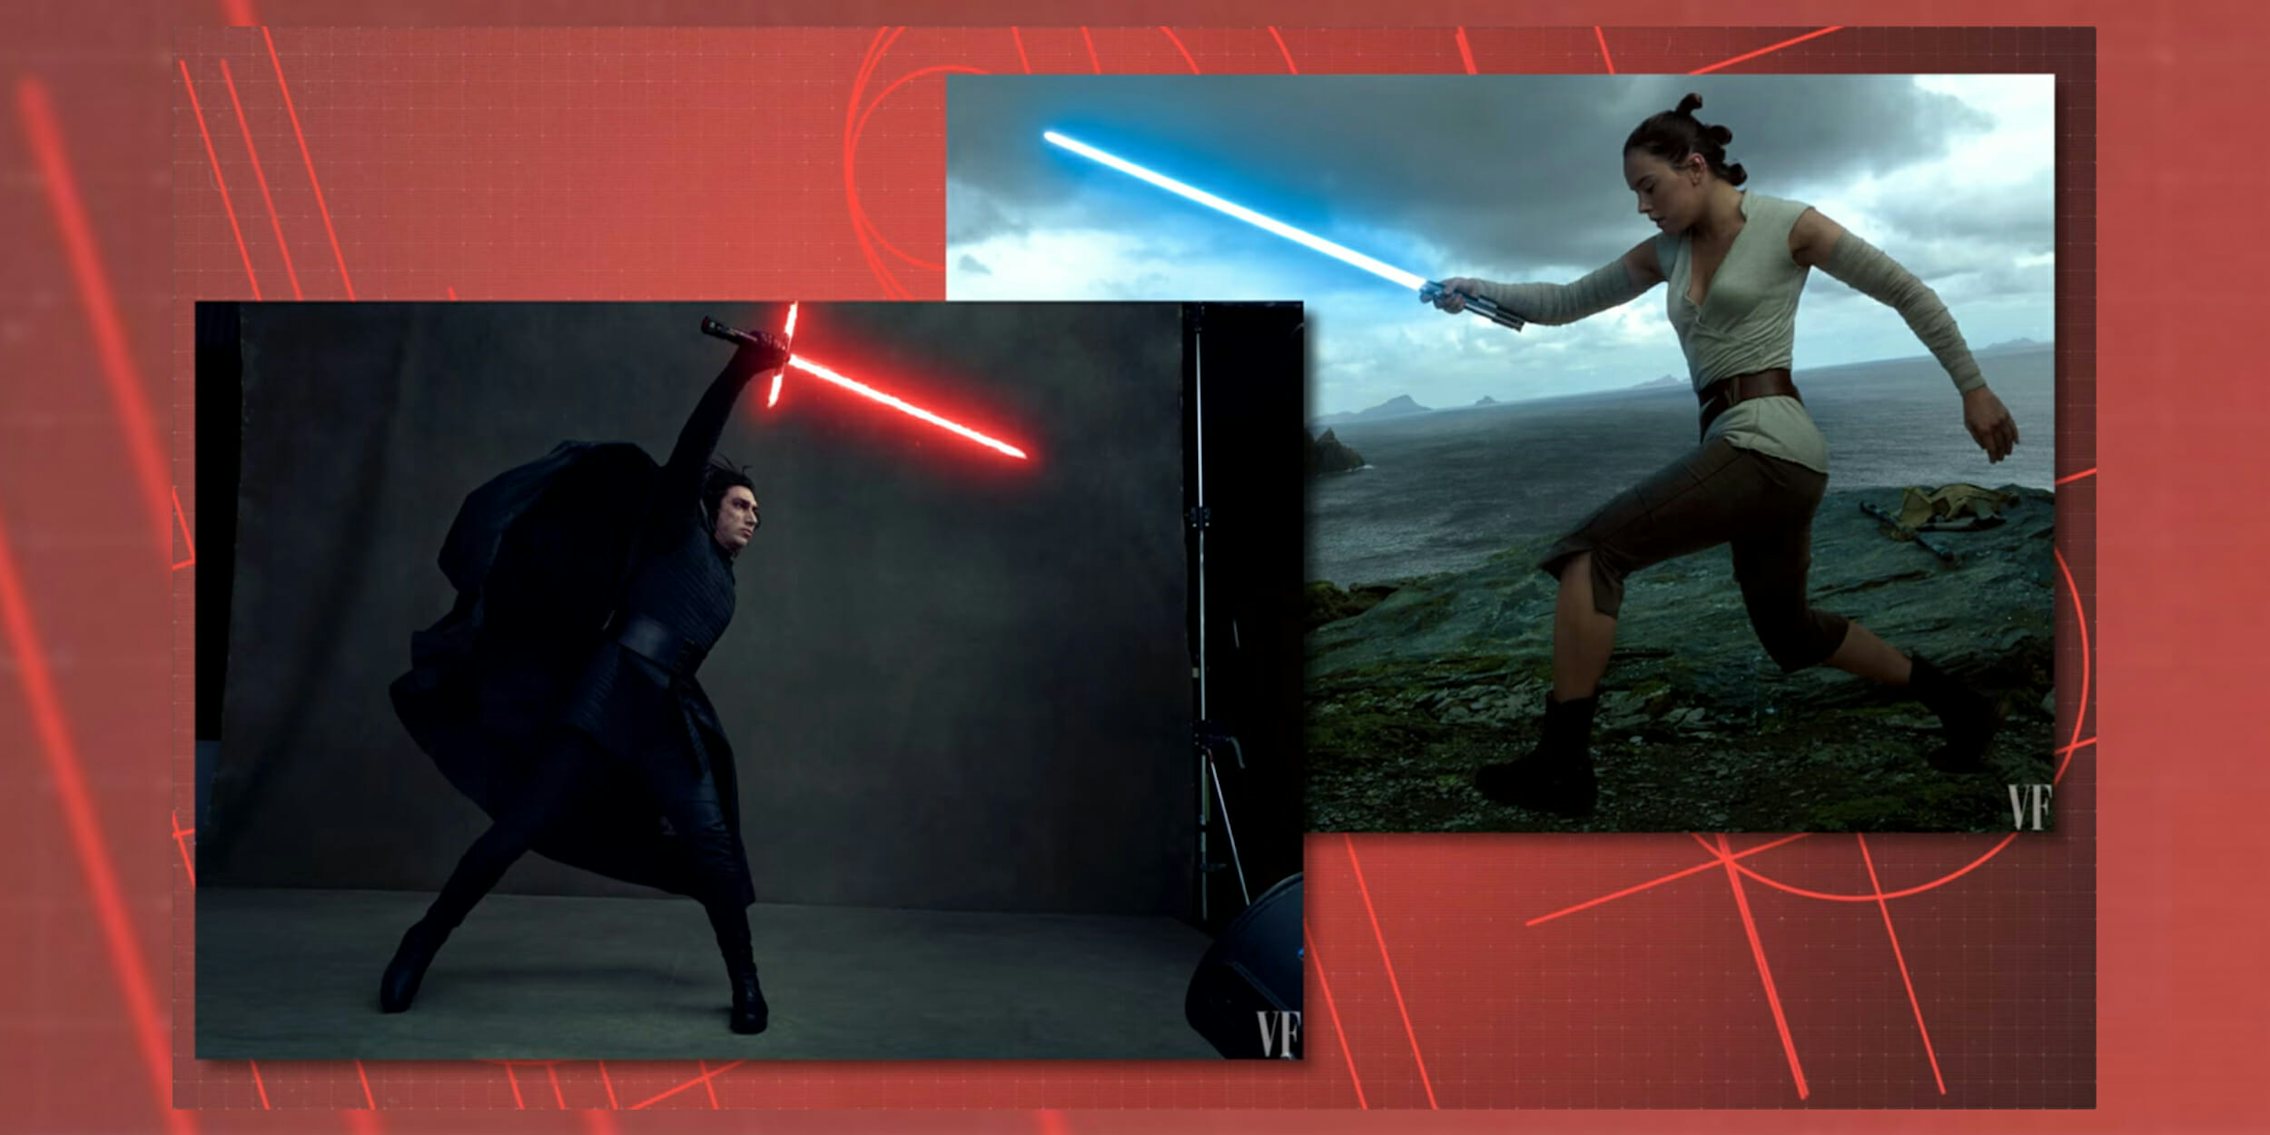 Kylo Ren and Rey with lightsabers